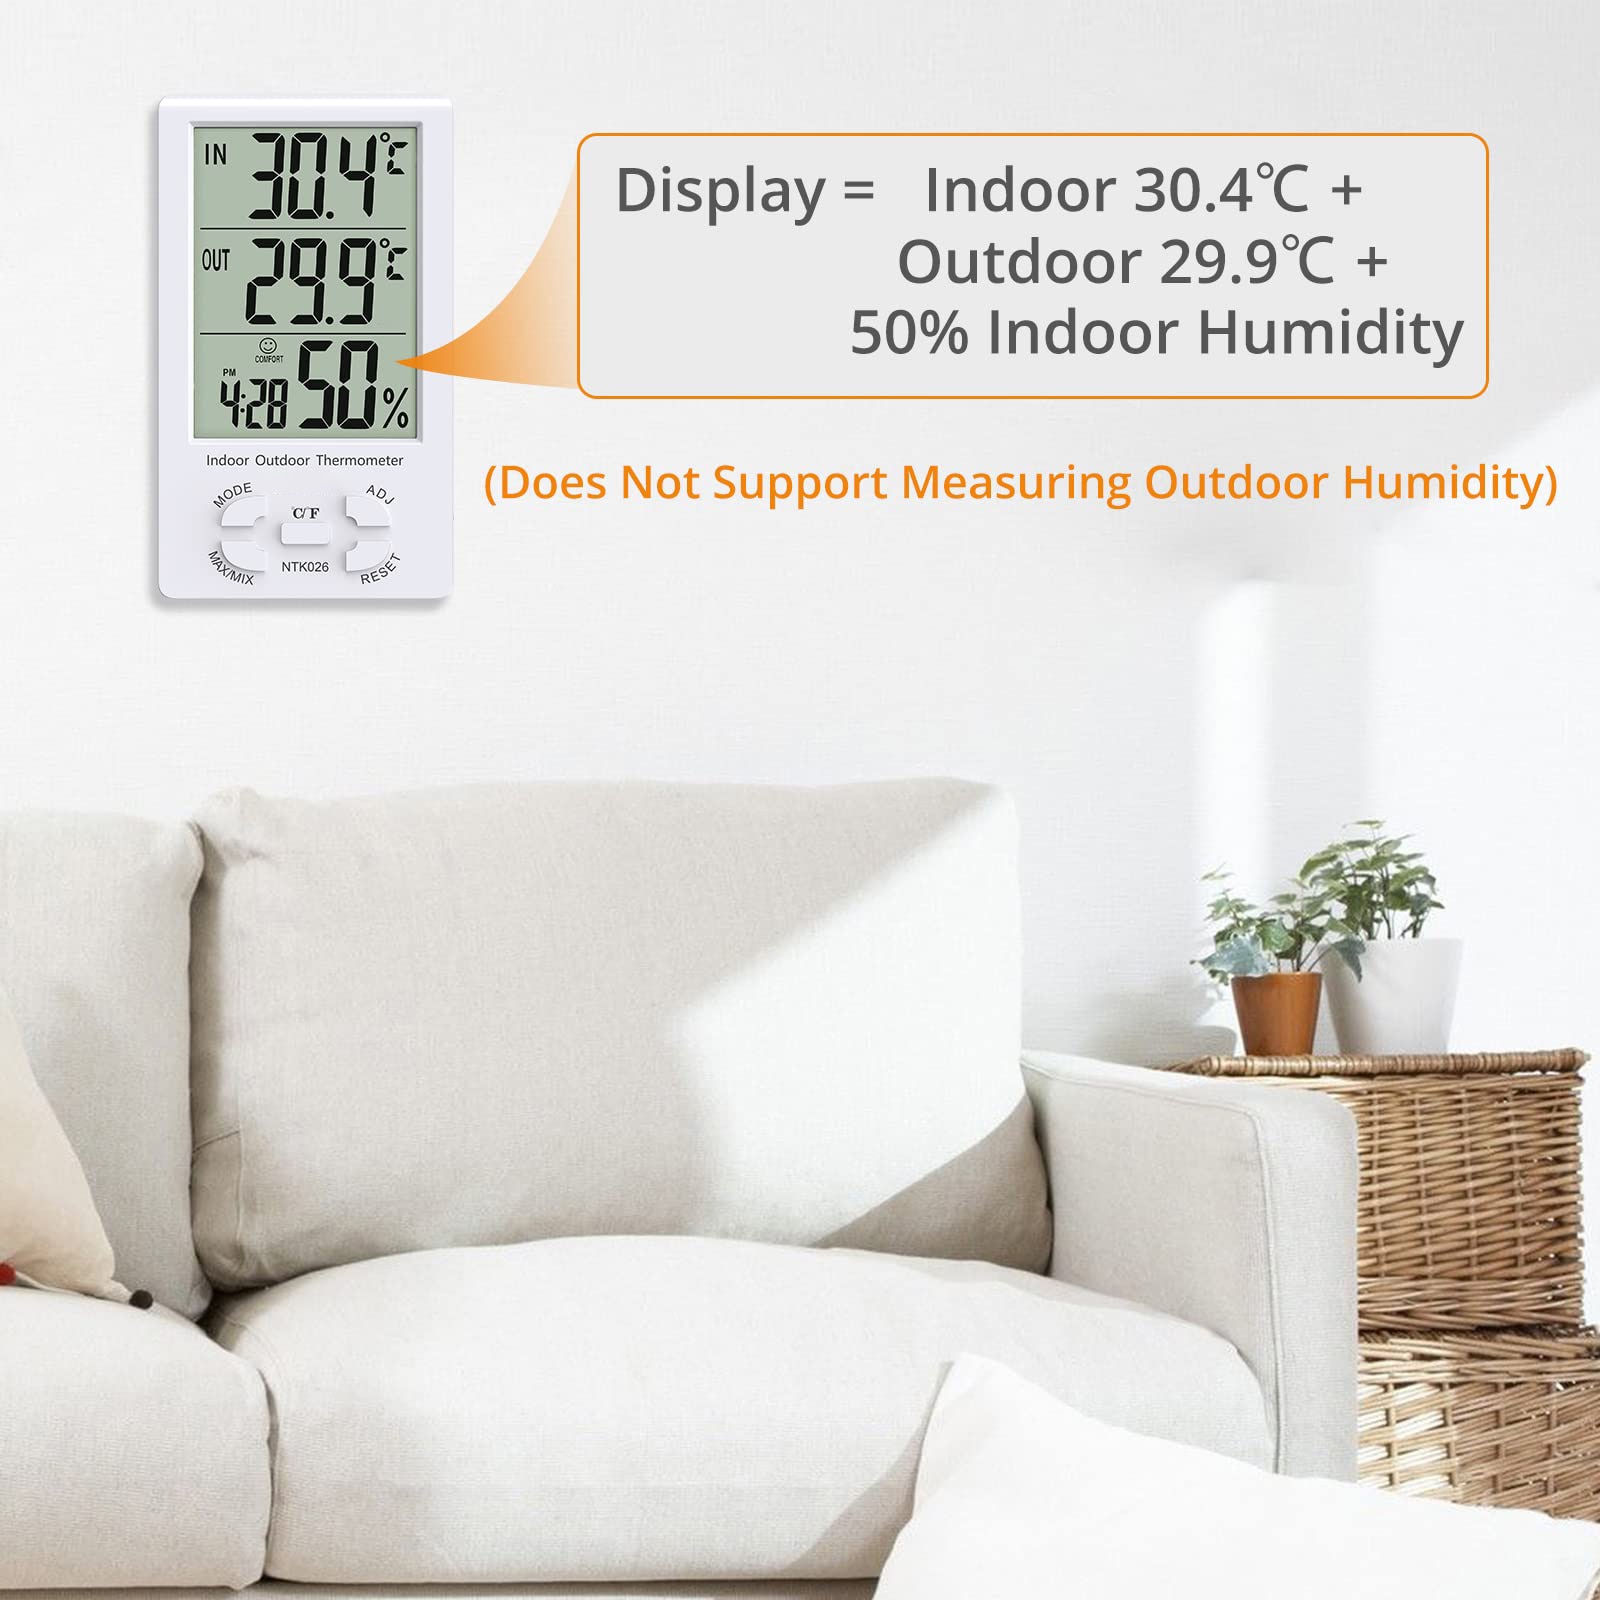 MULTICOMP PRO TA298 Thermometer, Hygrometer Clock, Indoor/Outdoor, 0°C to  +50°C, 150 mm, 88 mm, 25 mm